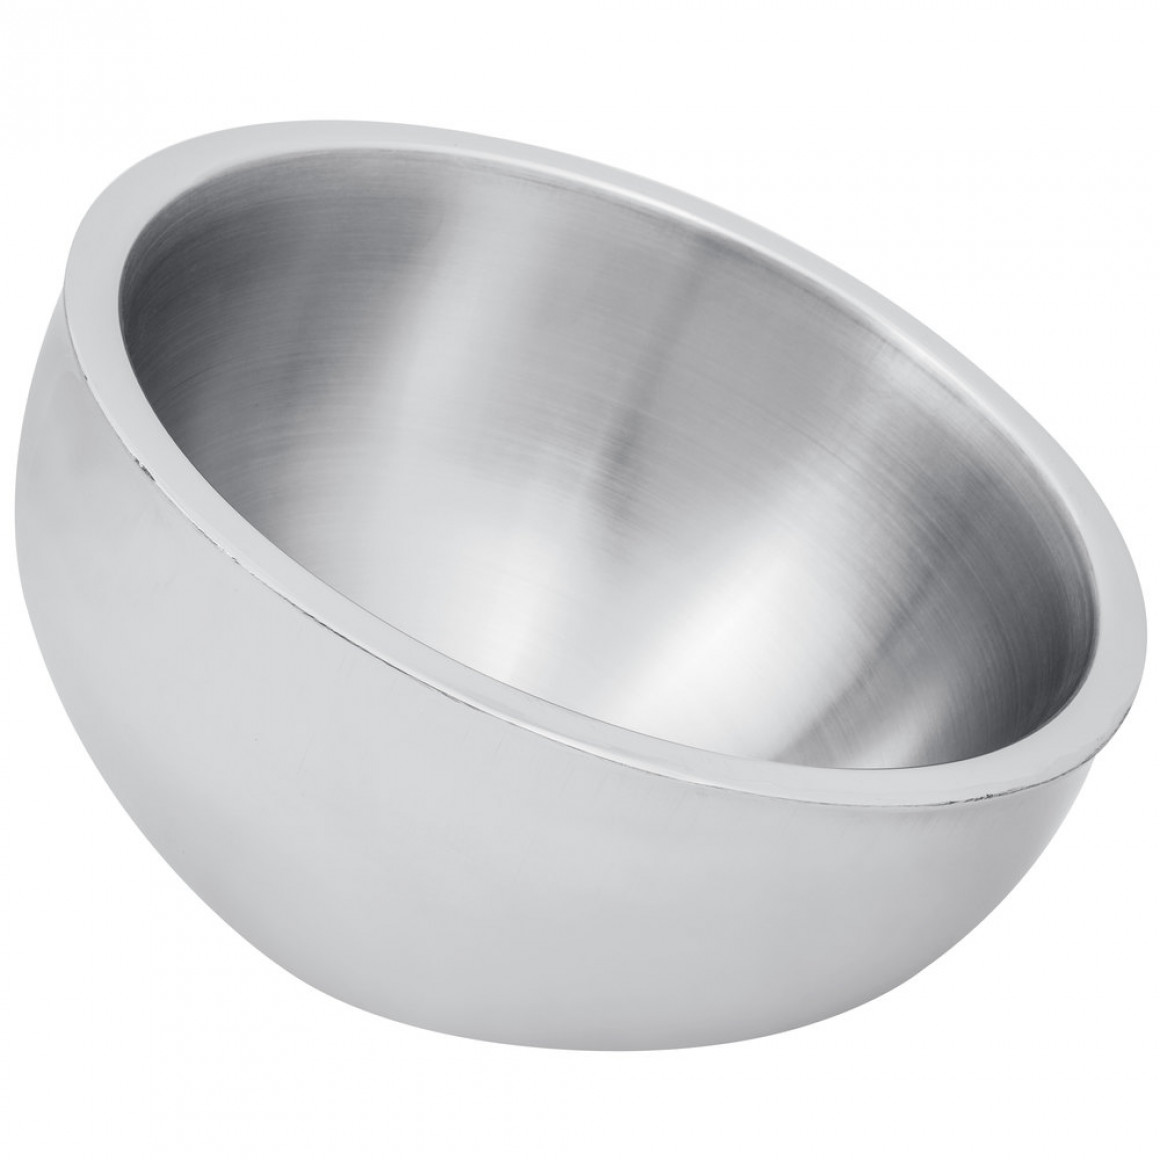 STAINLESS STEEL, SATIN BOWL, DOUBLE WALL, ANGLED, 54 OZ.